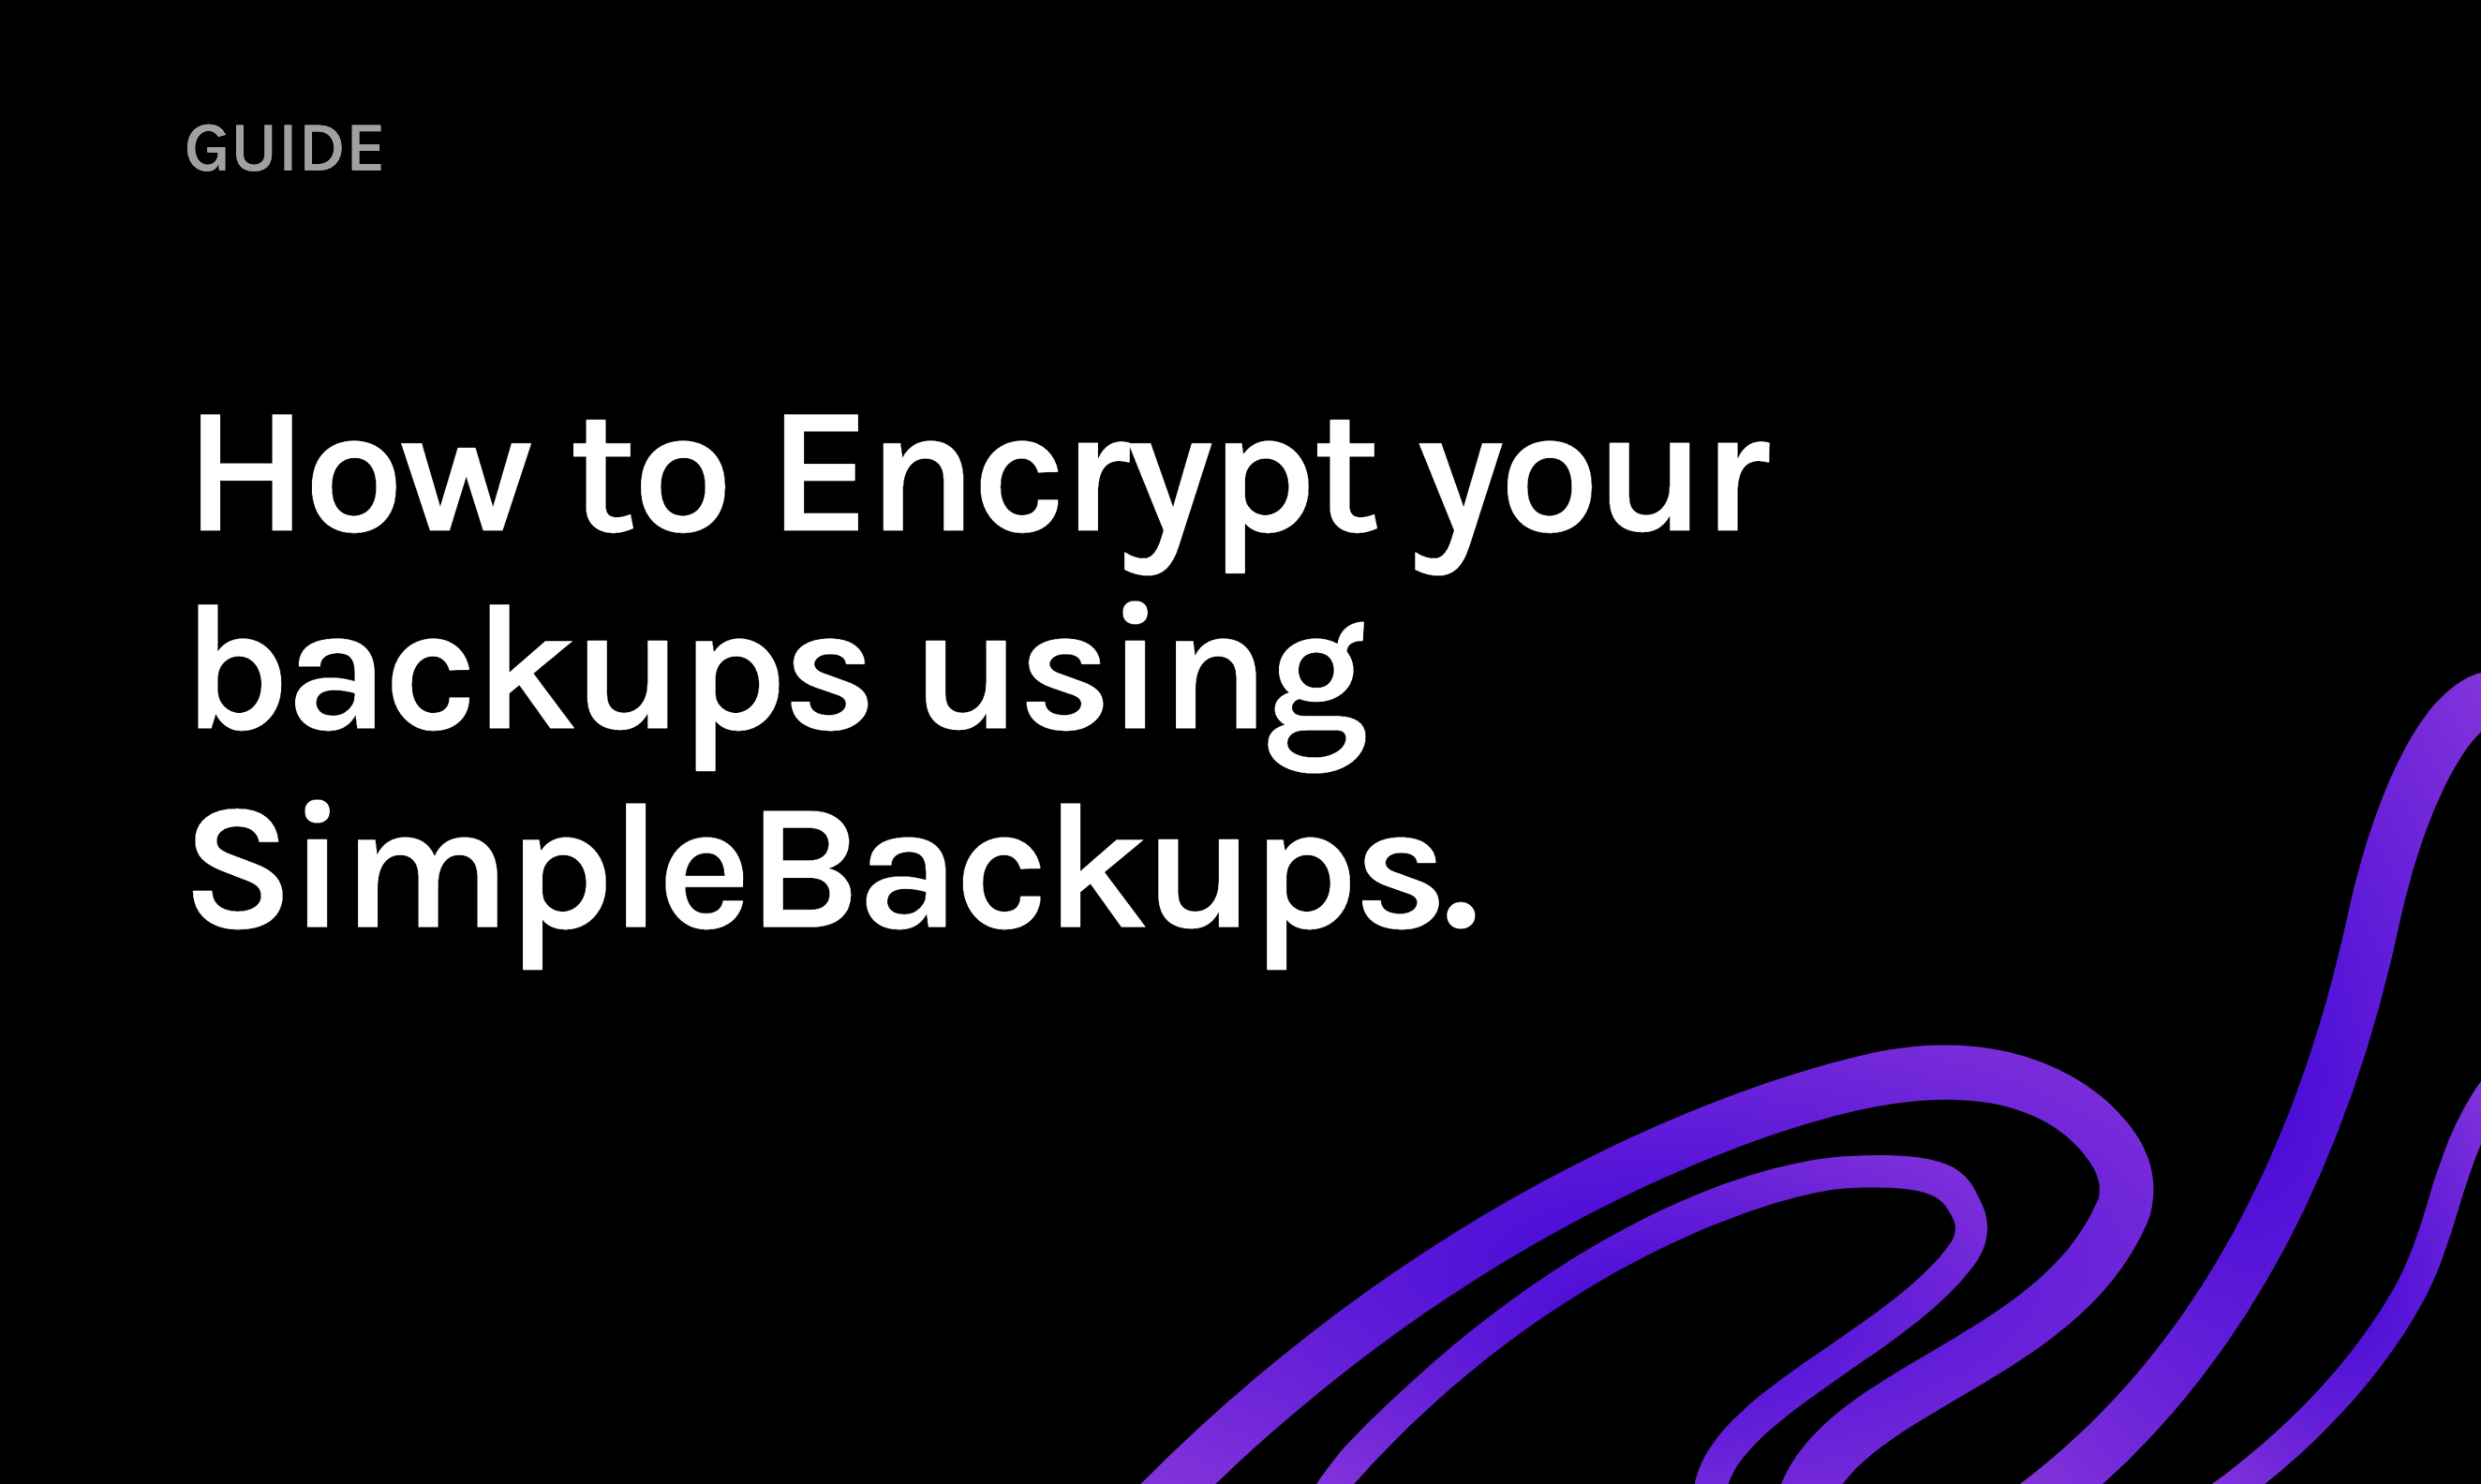 How to Encrypt Your Backups Using SimpleBackups